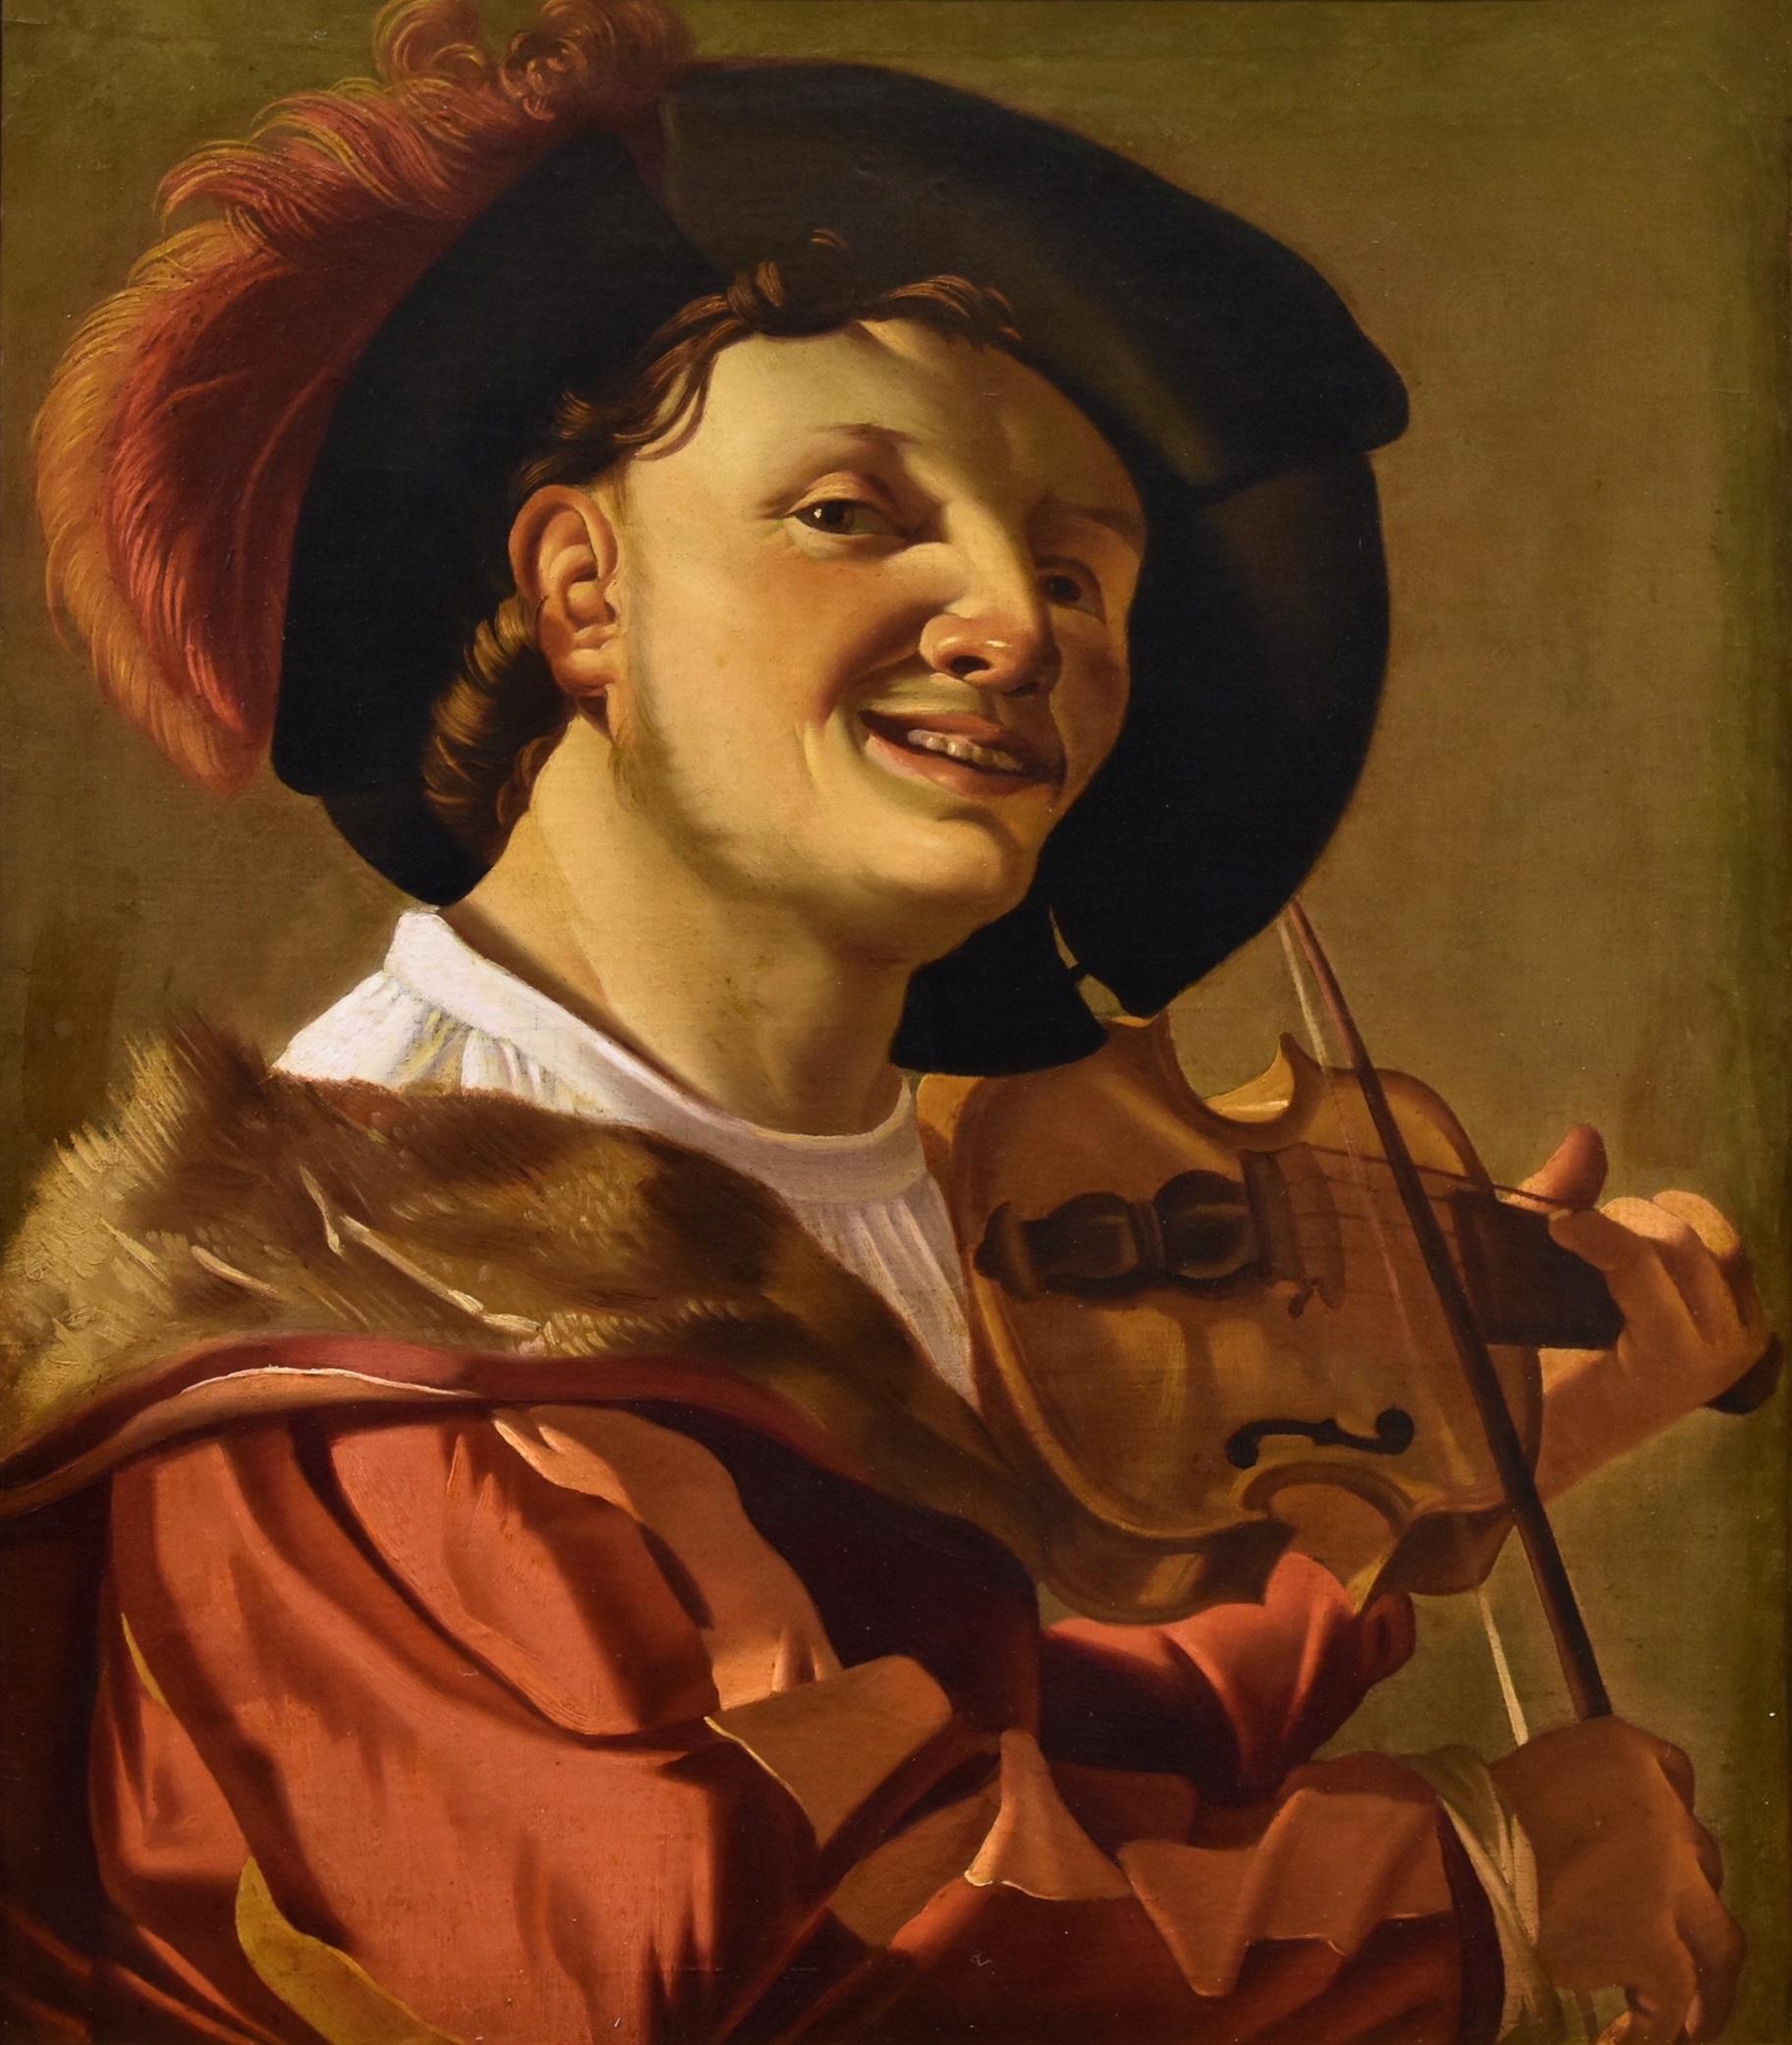 Violin Player Ter Brugghen Paint Oil on canvas 17th Century flemish Old master - Painting by Hendrick Ter Brugghen (the Hague 1588-1629 Utrecht) 